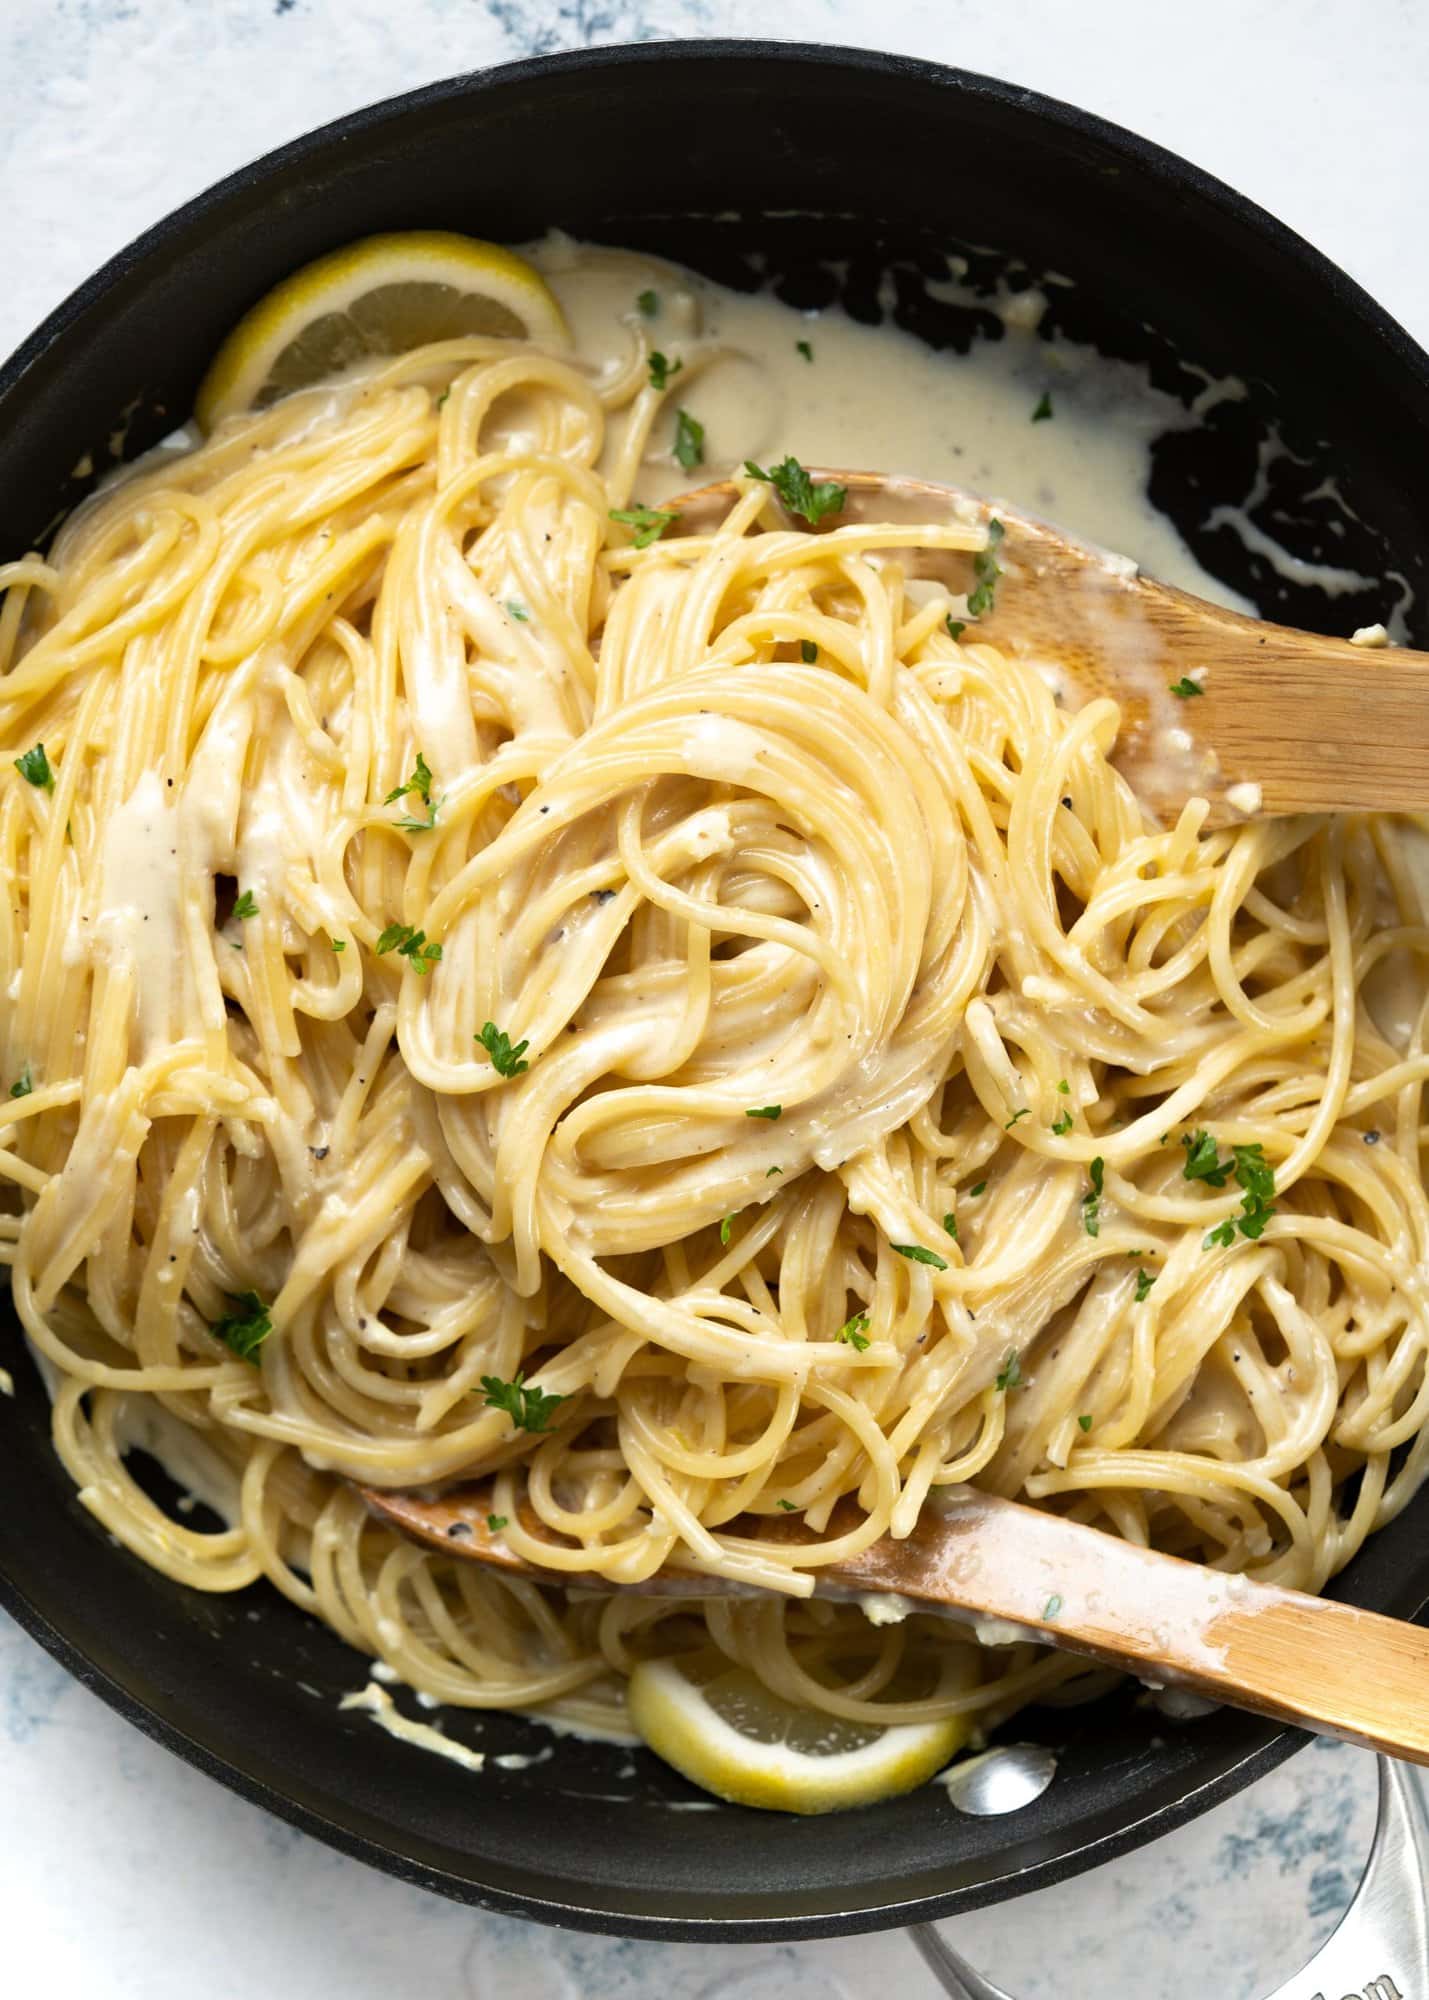 One-pot pasta with a lemony creamy sauce made in a black skillet with straight sides.